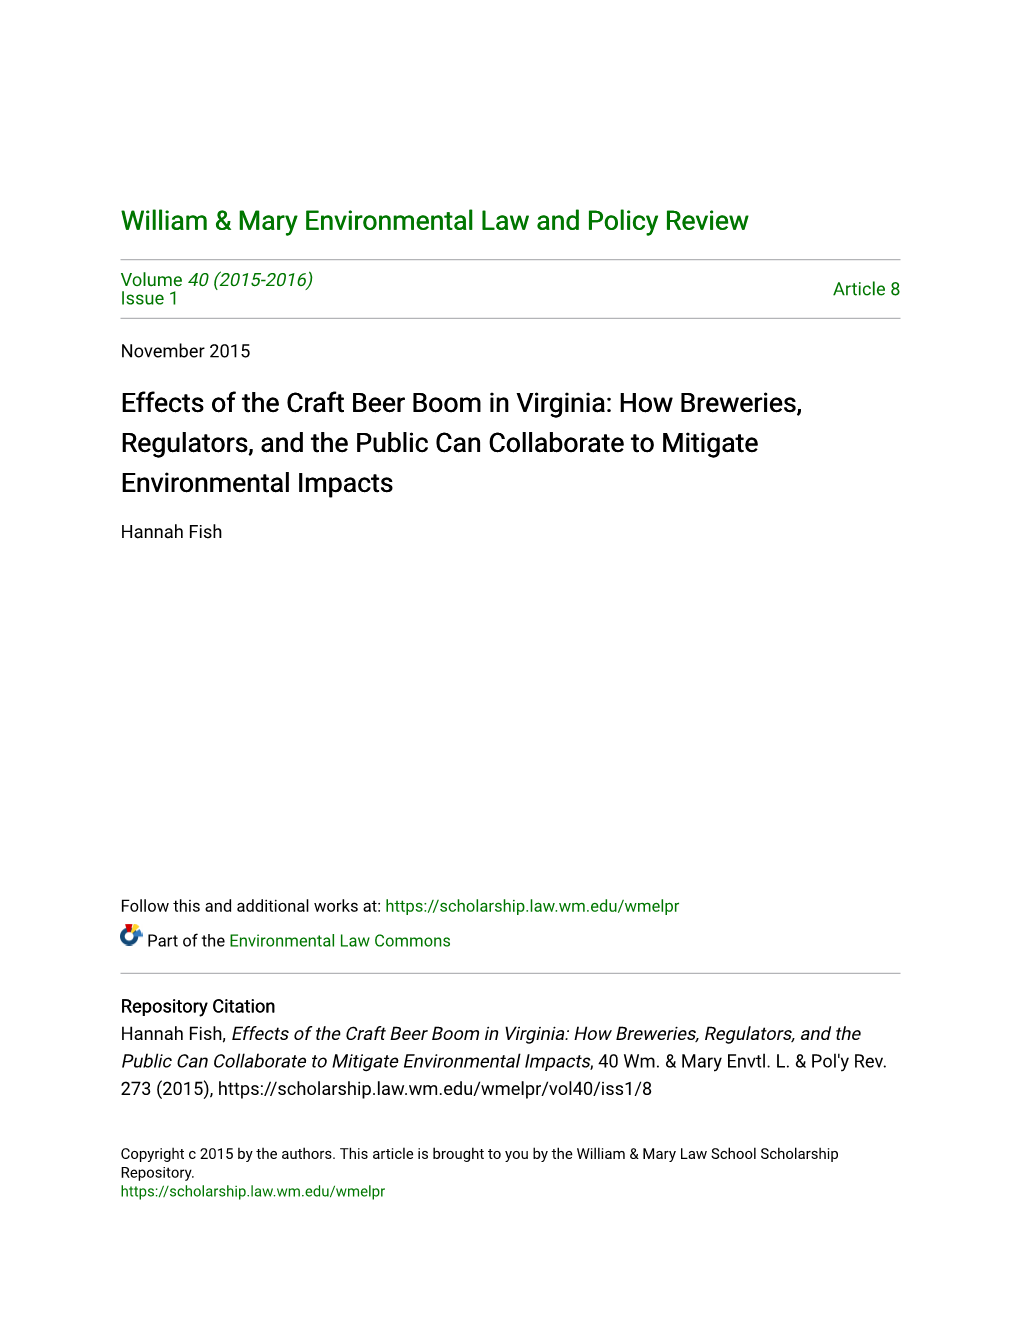 Effects of the Craft Beer Boom in Virginia: How Breweries, Regulators, and the Public Can Collaborate to Mitigate Environmental Impacts